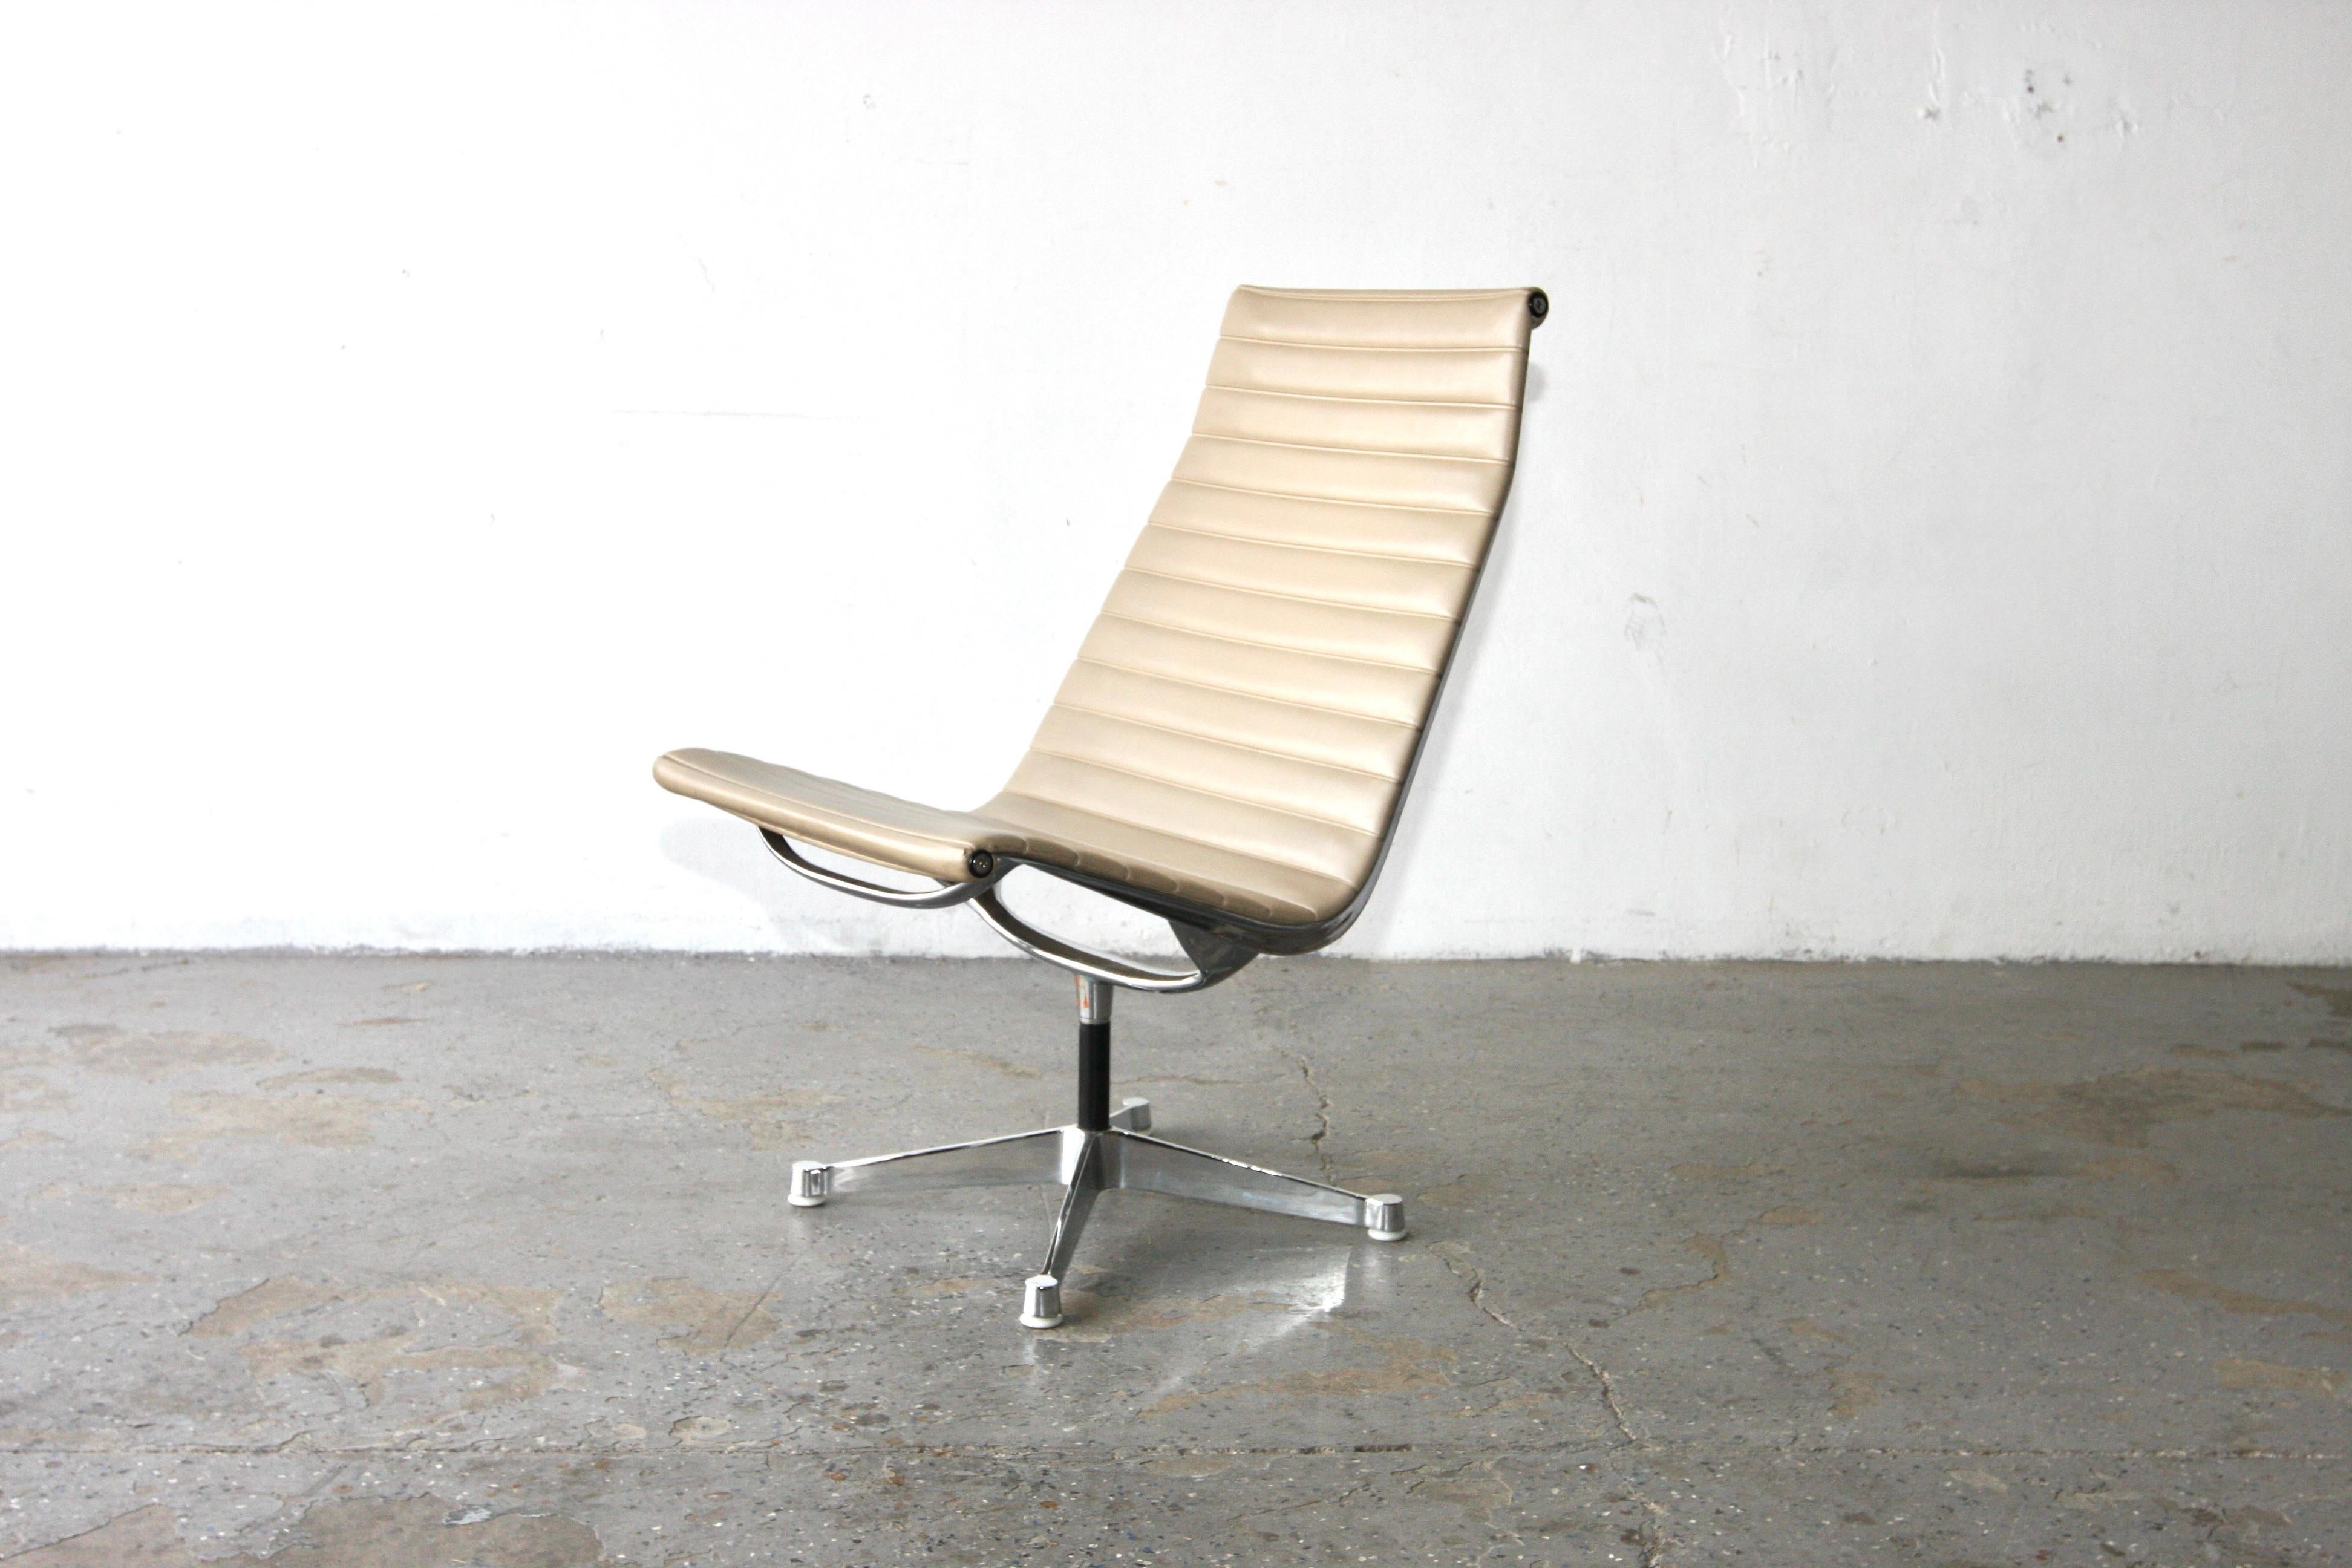 
This is an original Iconic  Eames Aluminum Group Lounge Chair designed by Charles and Ray Eames for Herman Miller in 1958. It was produced in the late 60’s or early 70’s . The pieces sport solid yet lightweight aluminum frames, and their upholstery